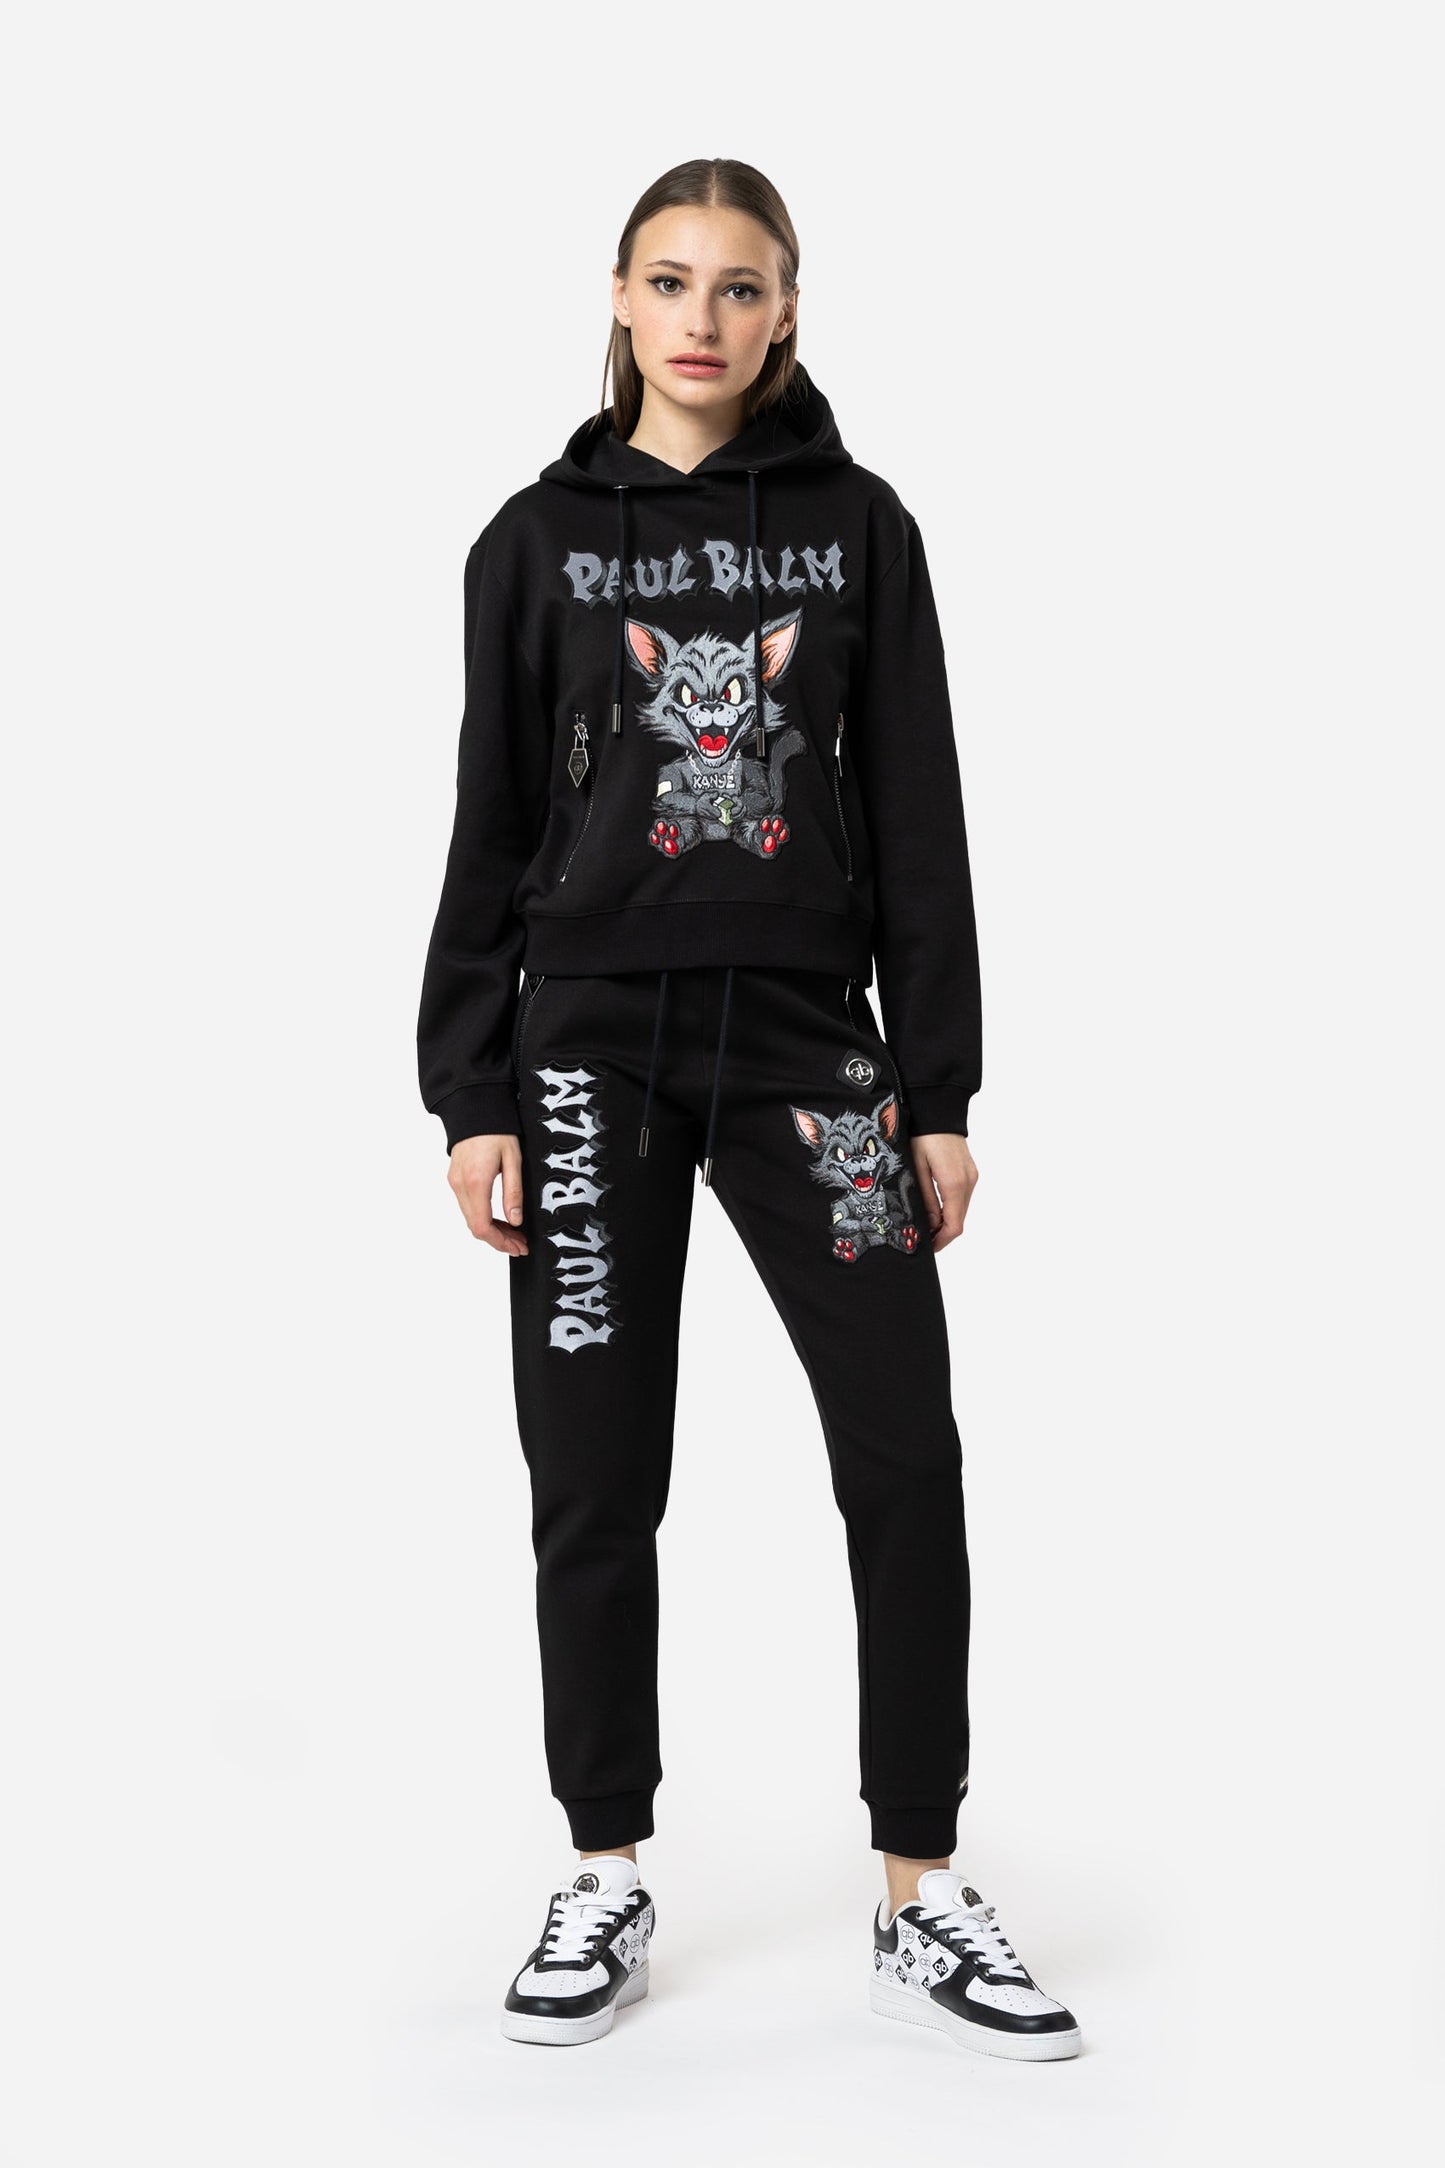 Embroidered Black Kanye Hoodie - Limited to 300